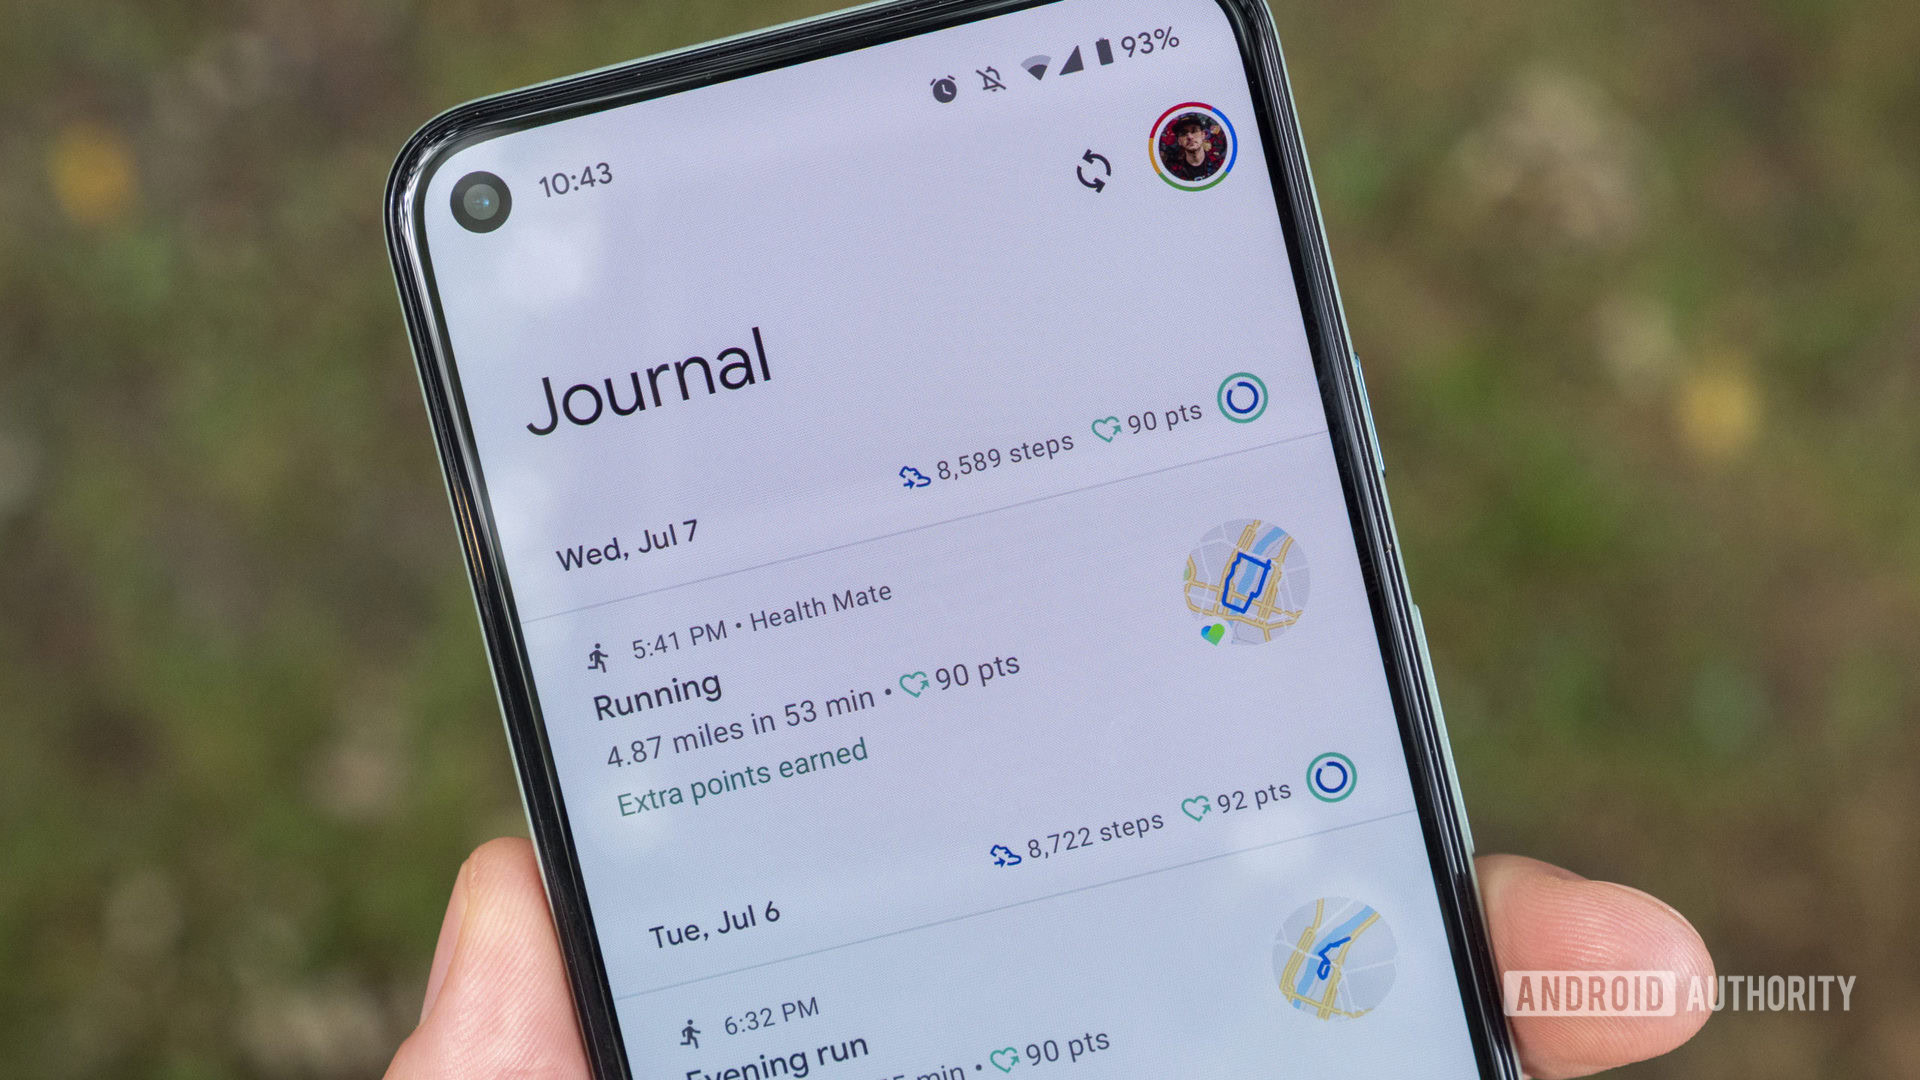 The Journal tab displays a user's recent workout sessions by date.